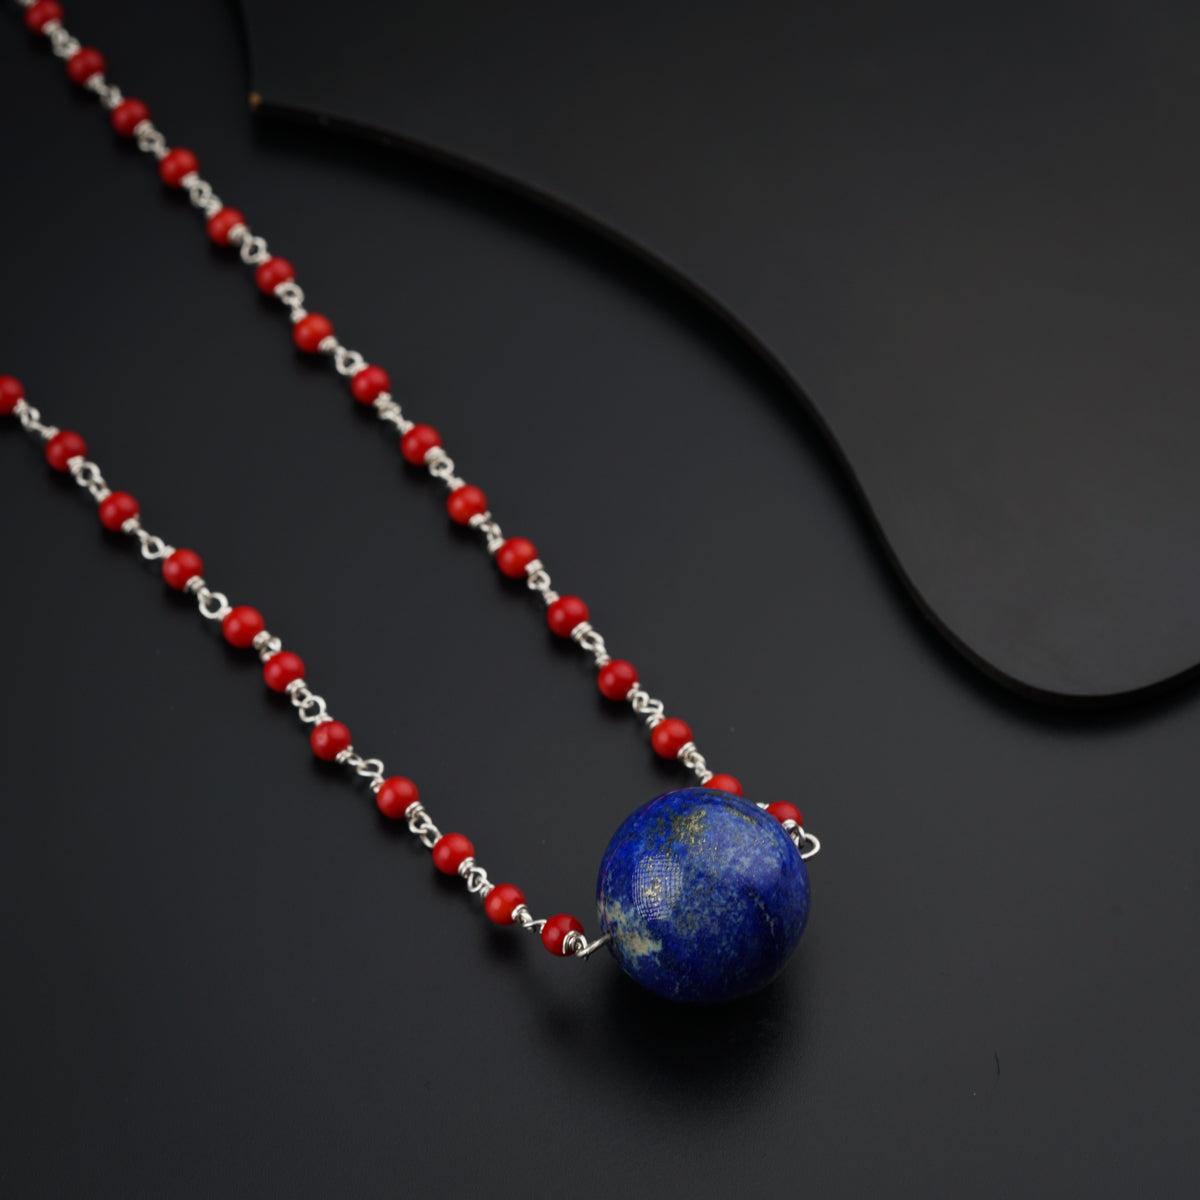 a necklace with a blue bead and a red bead